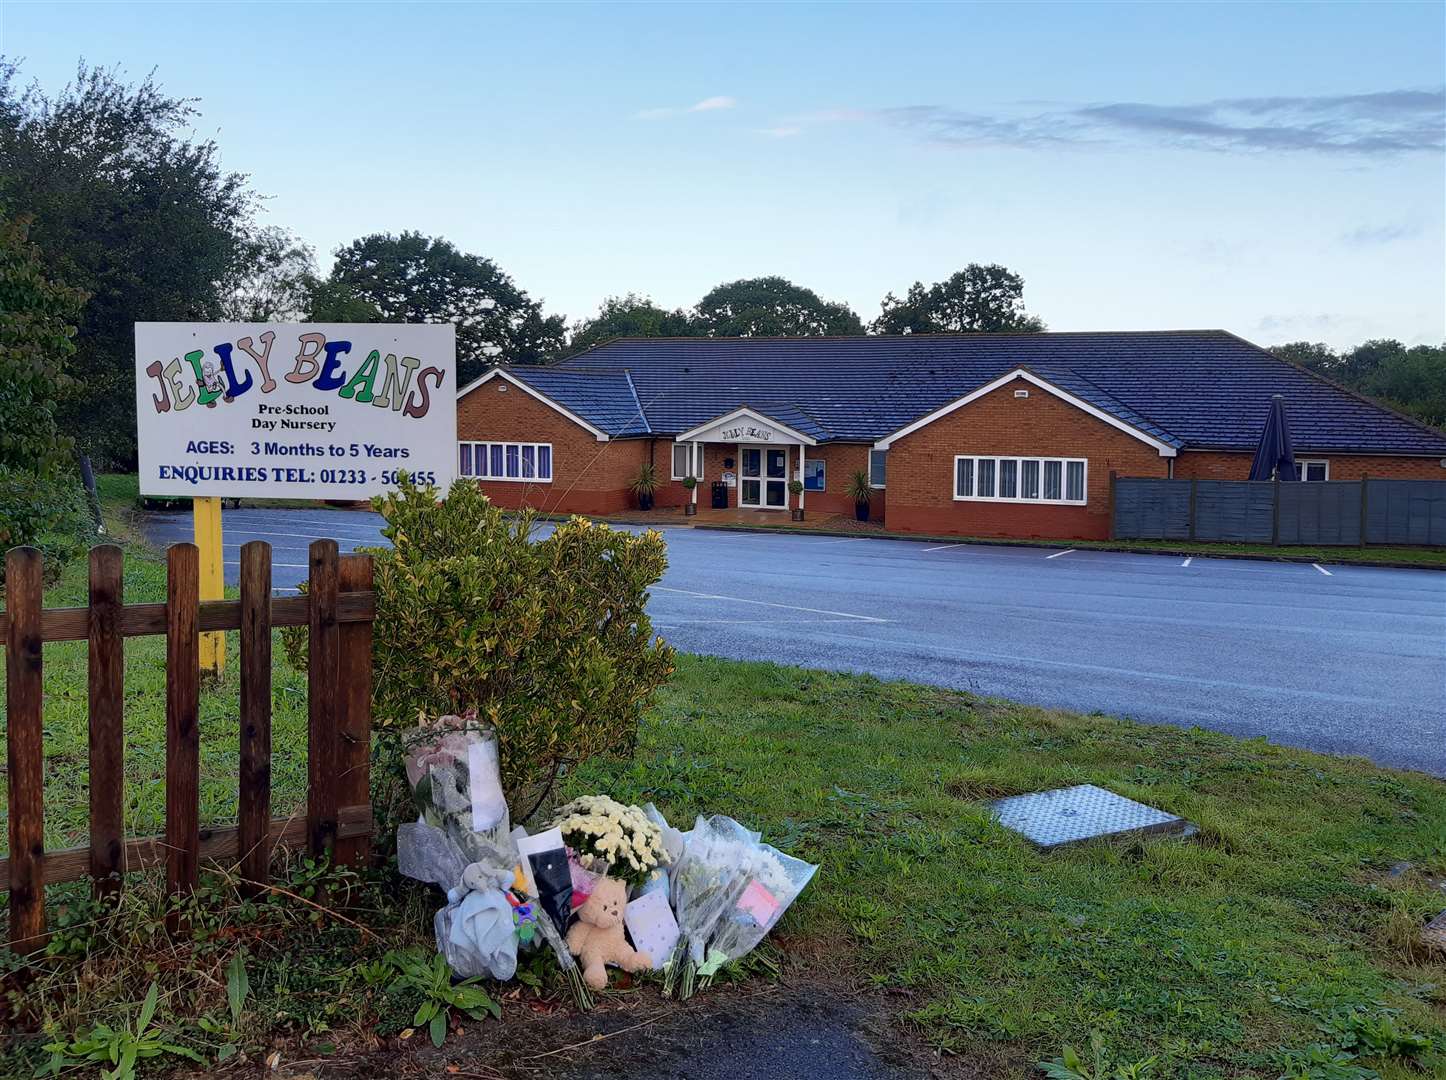 Jelly Beans Day Nursery closed down after the incident in September 2021